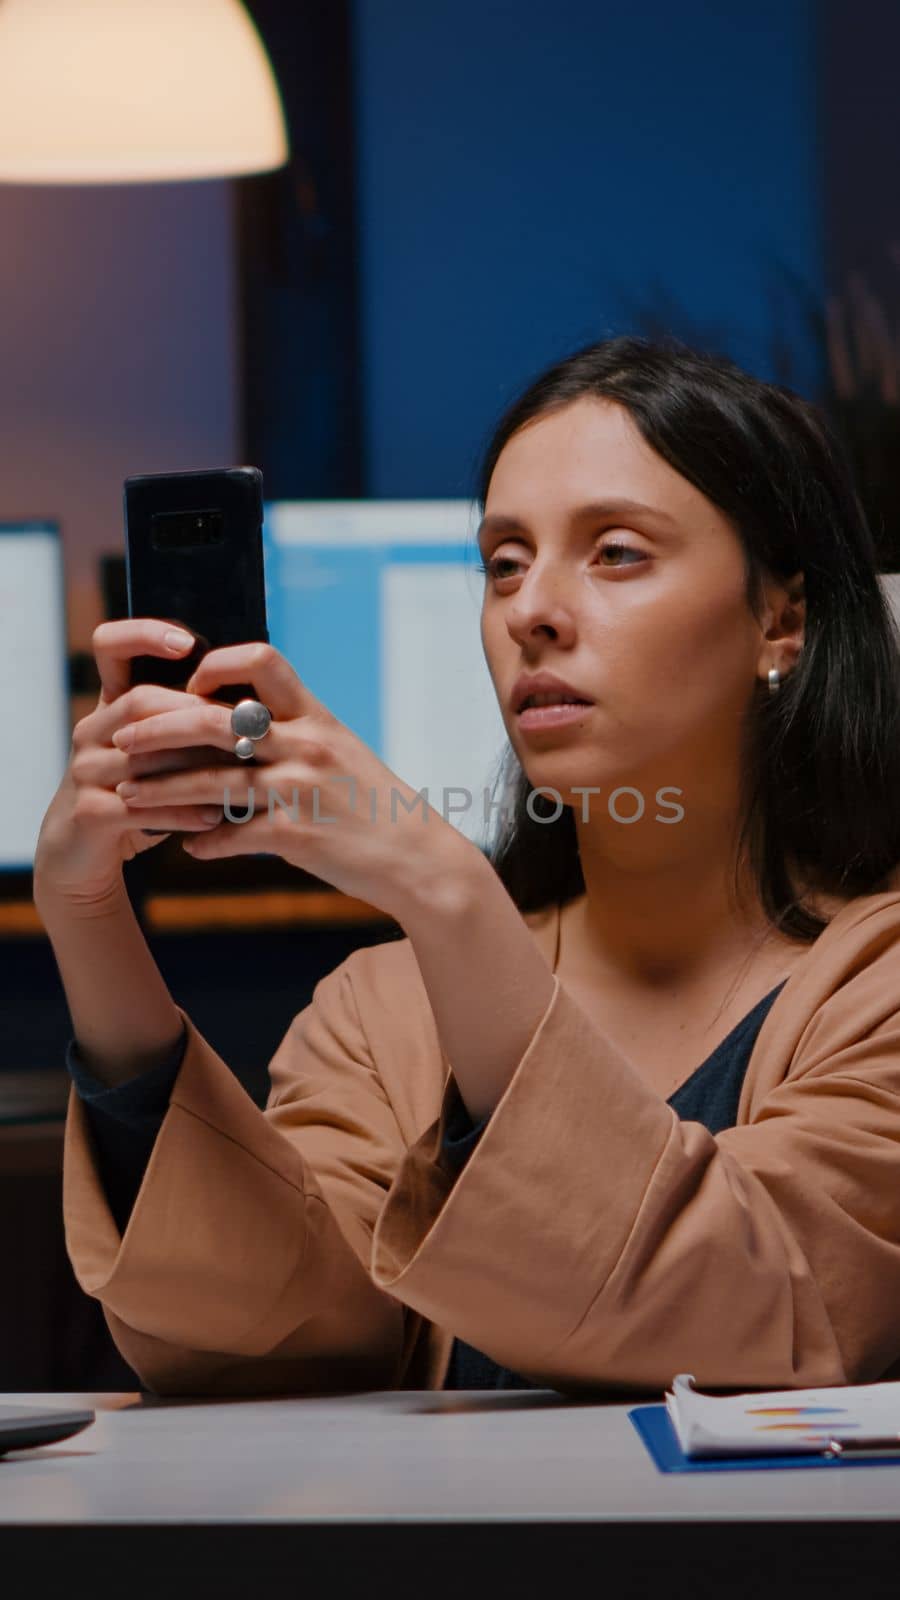 Overworked executive manager holding phone texting marketing ideas analysing social media strategy sitting at desk in business company office. Businesswoman checking online information late at night